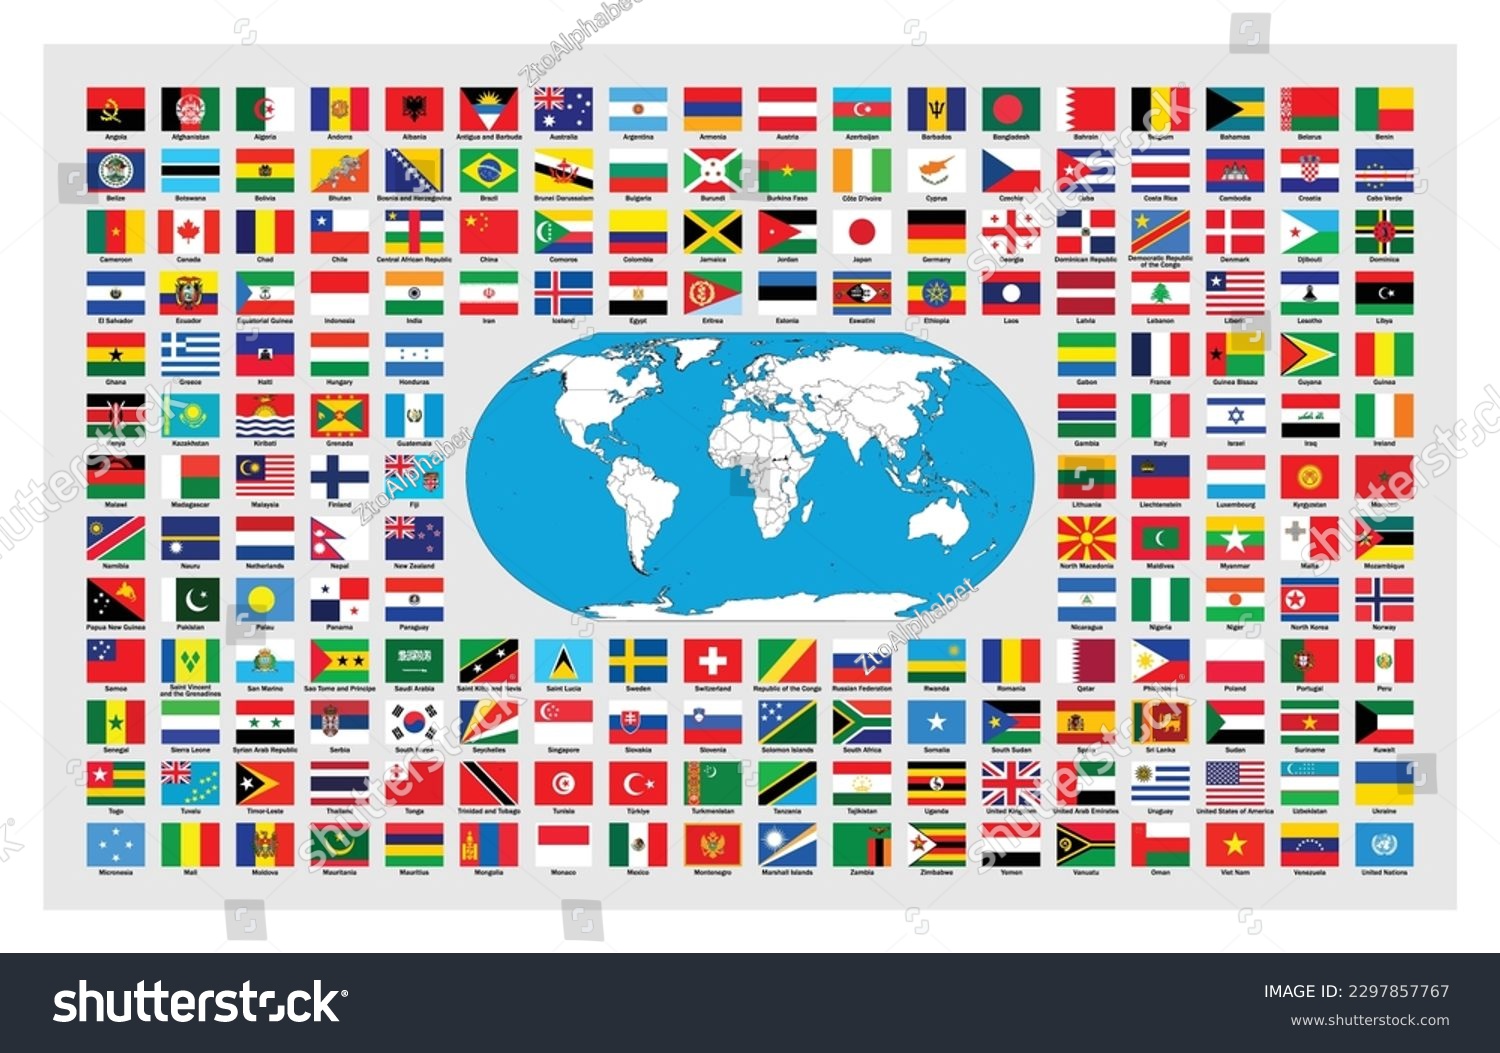 SVG of Nation Flag of Different Countries with world map vector, Collection set SVG of sovereign state flags of the Worlds with their name clipart svg